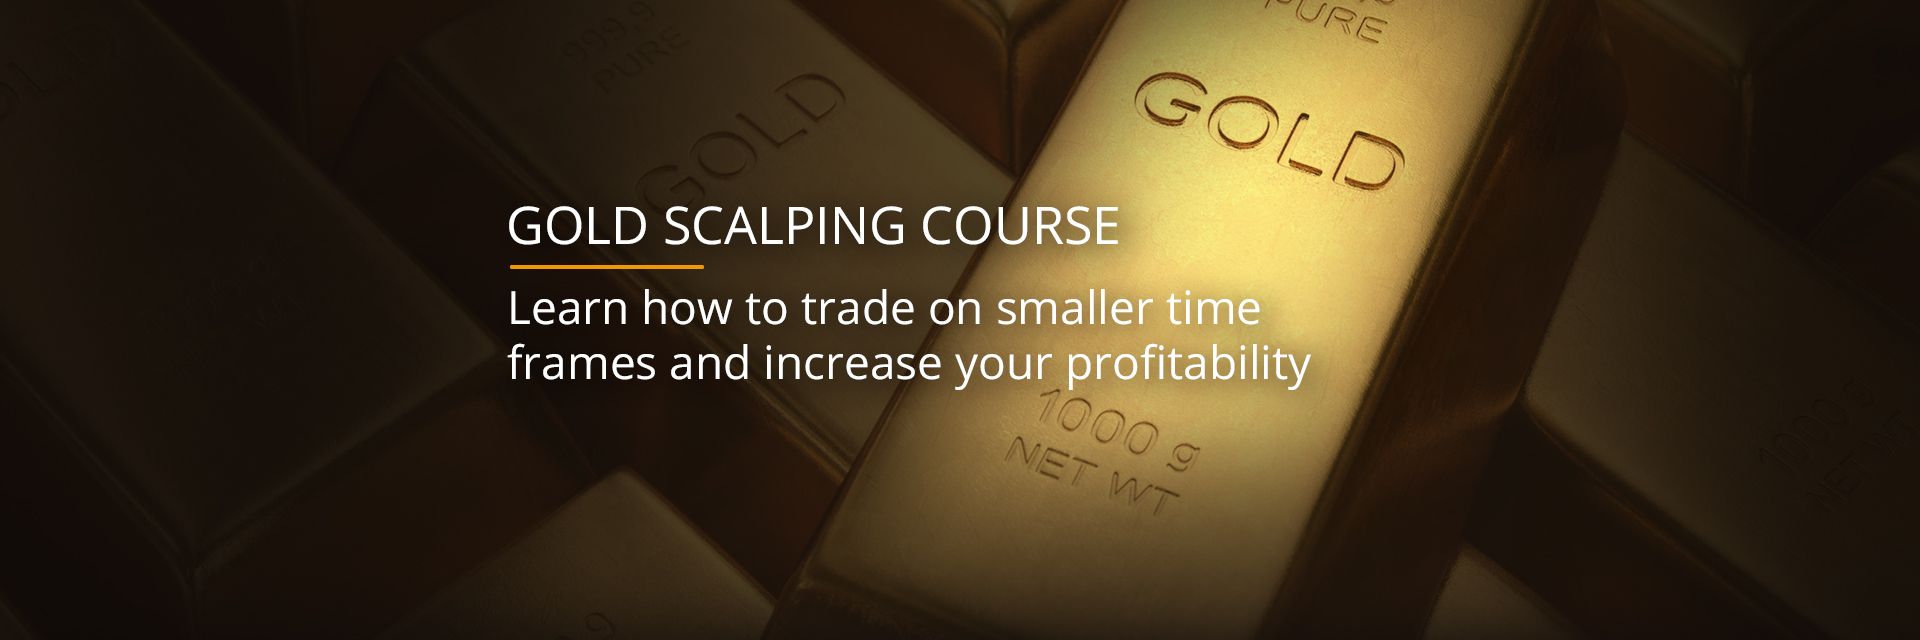 Gold Scalping Course Purchase